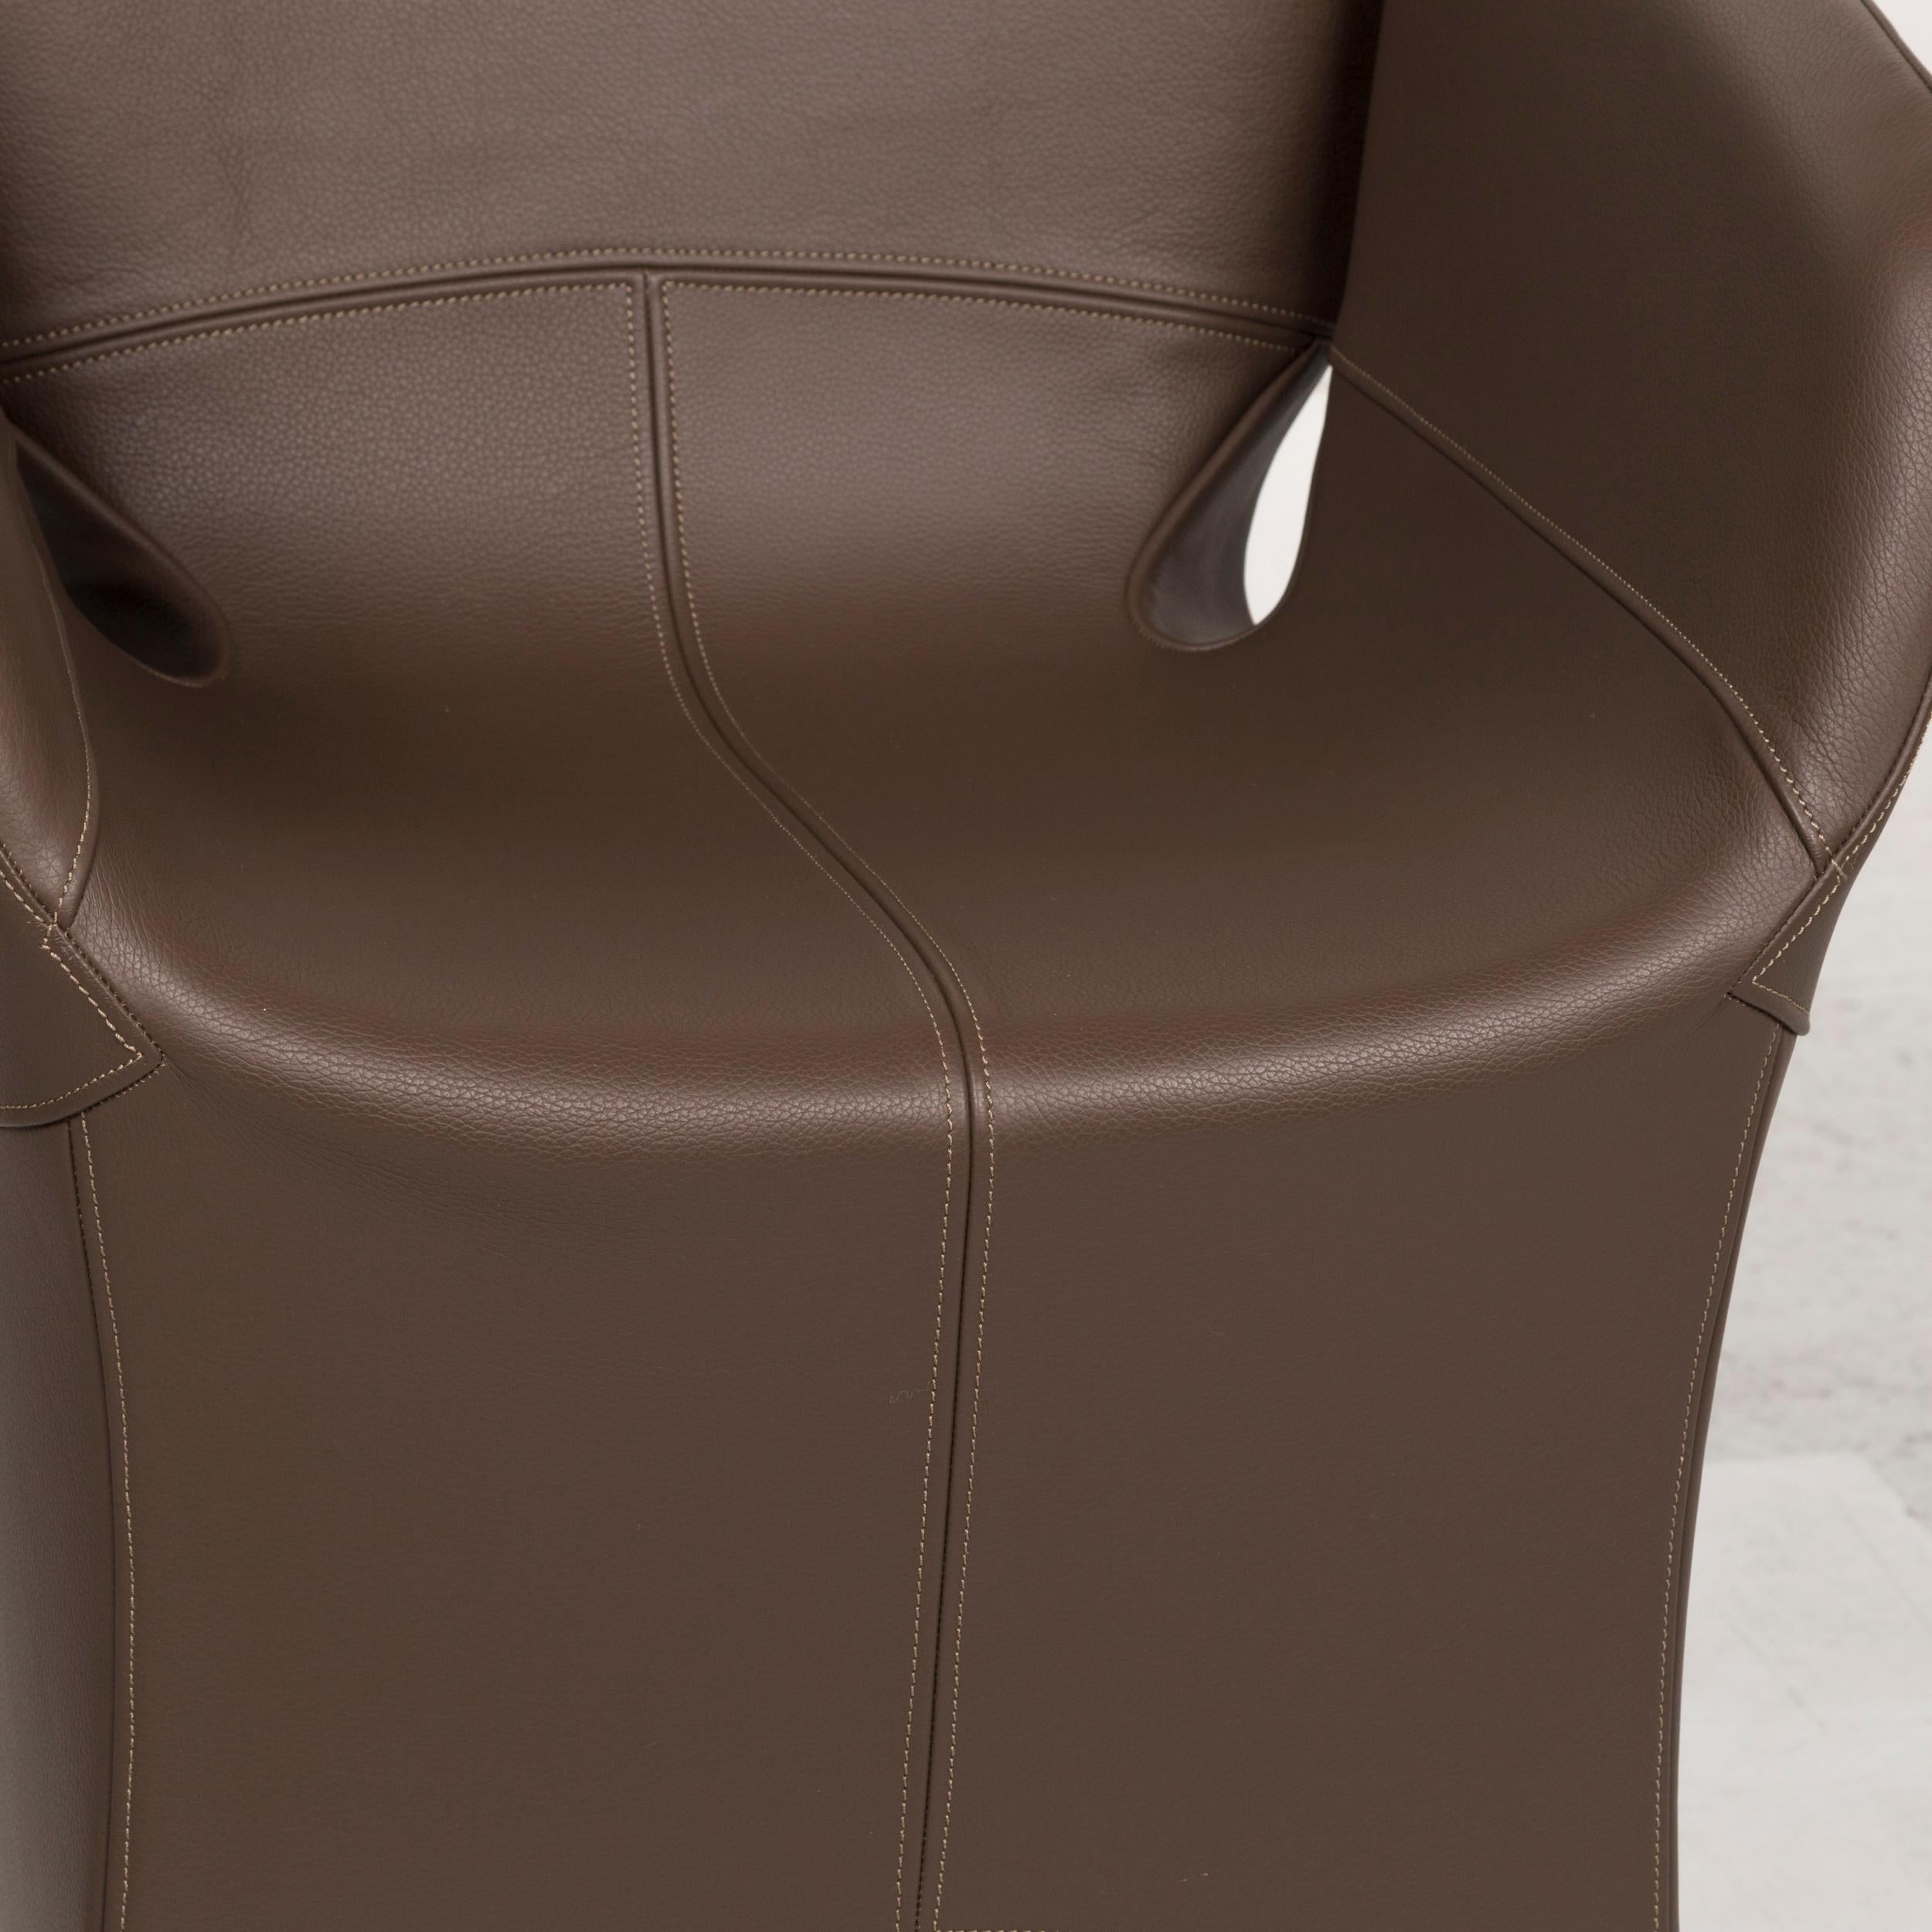 We bring to you a Moroso Bloomy leather armchair brown.
   
 

 Product measurements in centimeters:
 

Depth 55
Width 56
Height 75
Seat-height 46
Rest-height 70
Seat-depth 40
Seat-width 40
Back-height 30.